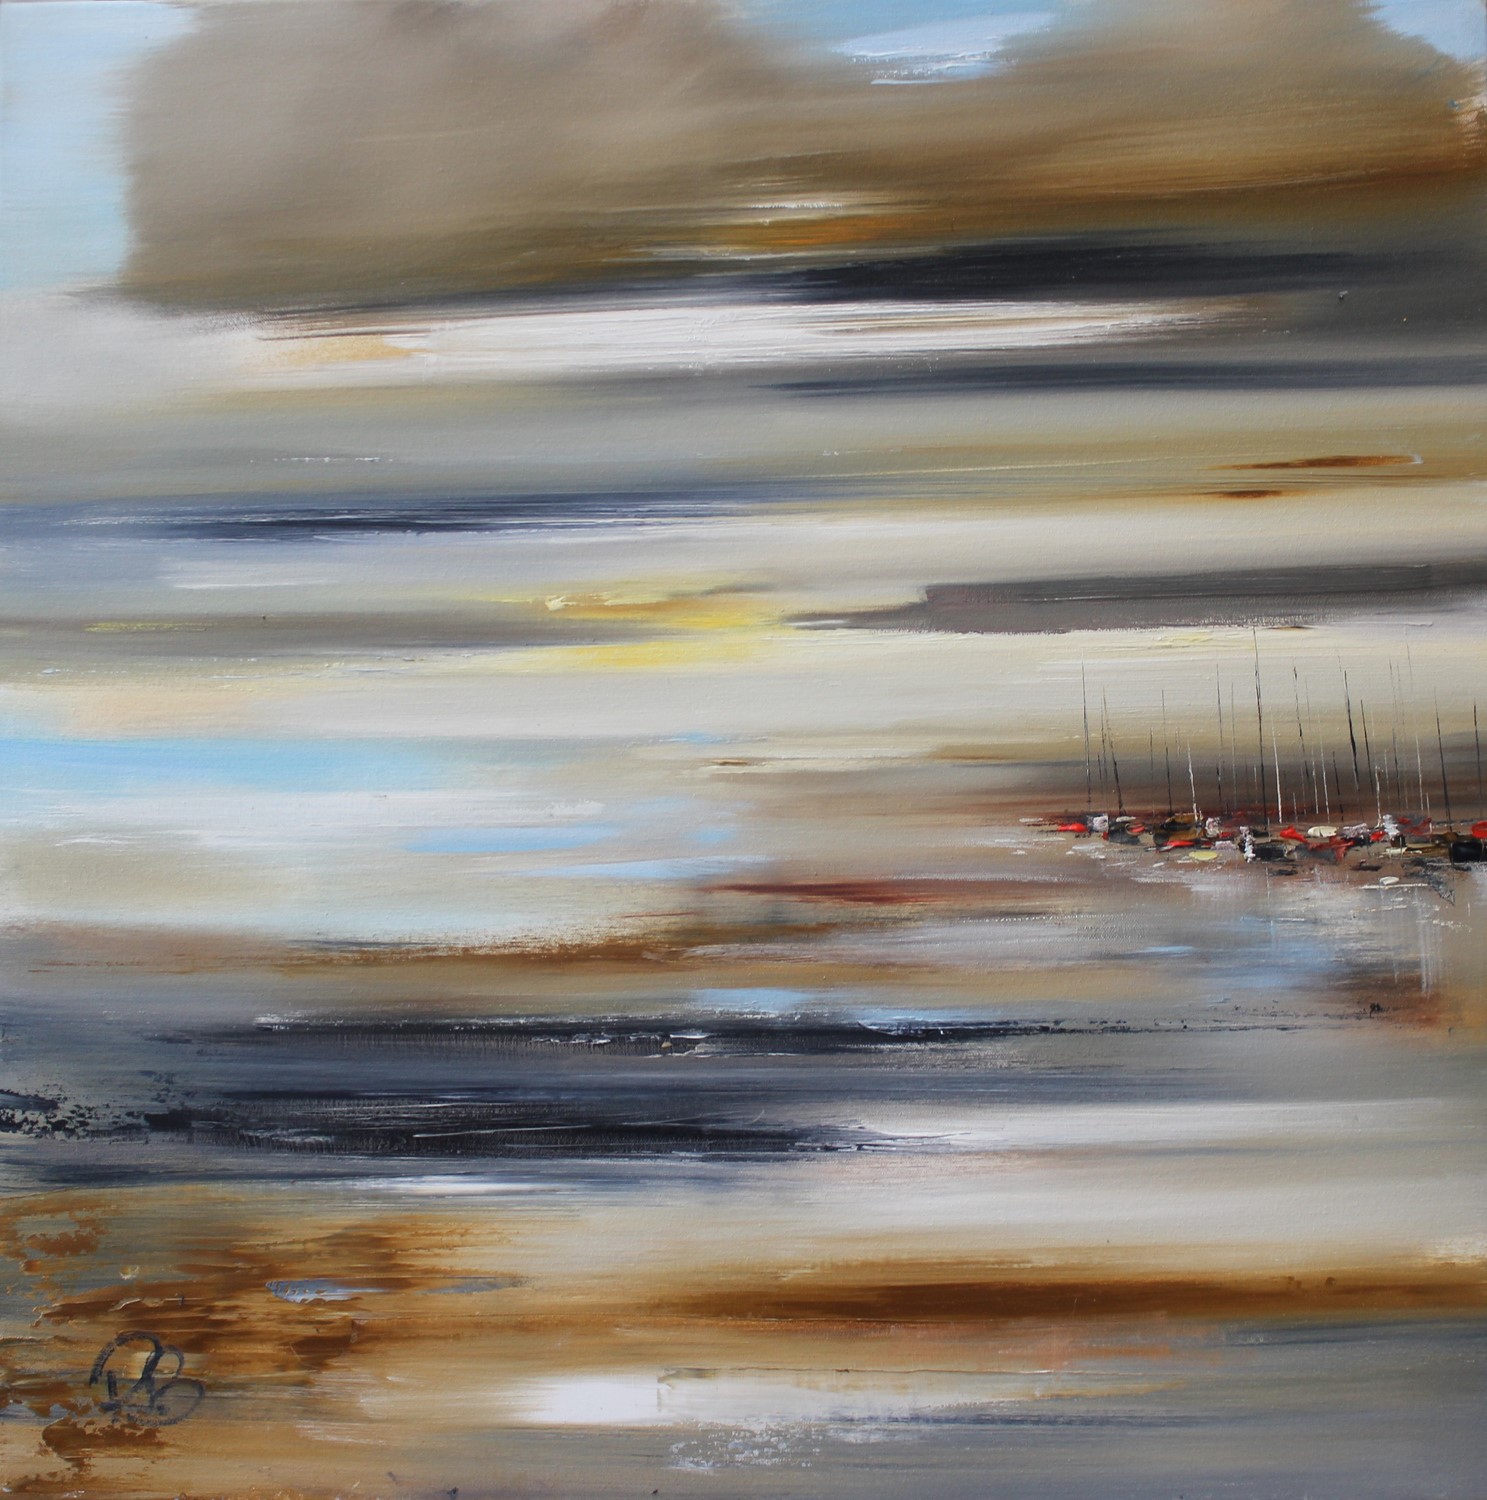 'View Across the Bay' by artist Rosanne Barr